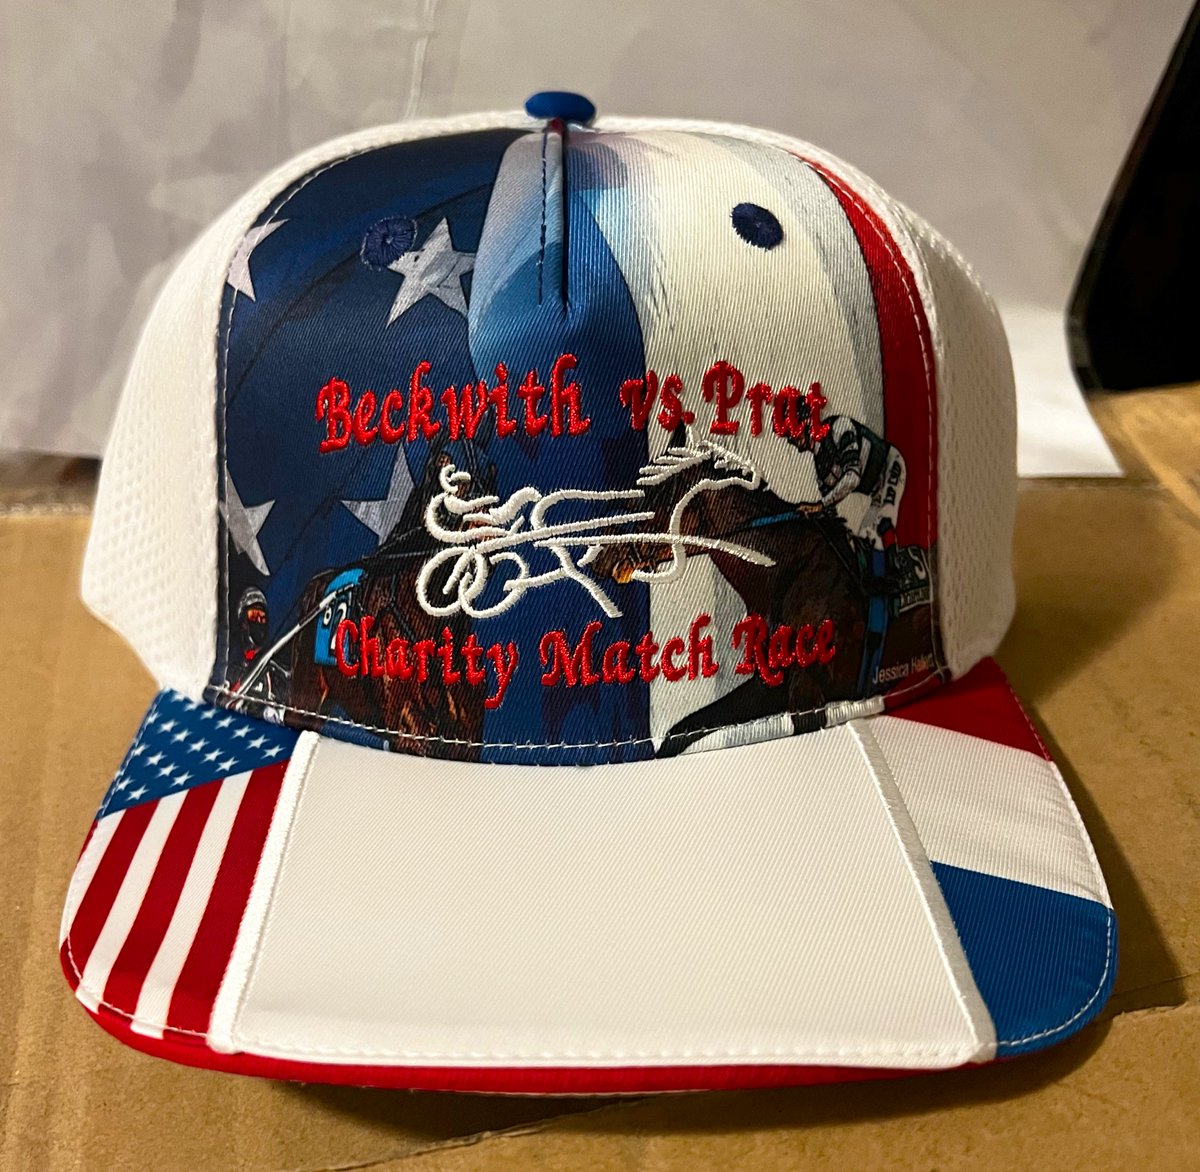 #beckwithvsprat hats are in!🤩🏇🏿
See everyone August 19th! Donations/Sponsors are still being accepted message if interested! #saratogaracecourse #saratogaharness @TheNYRA @USTrotting @barstoolsports